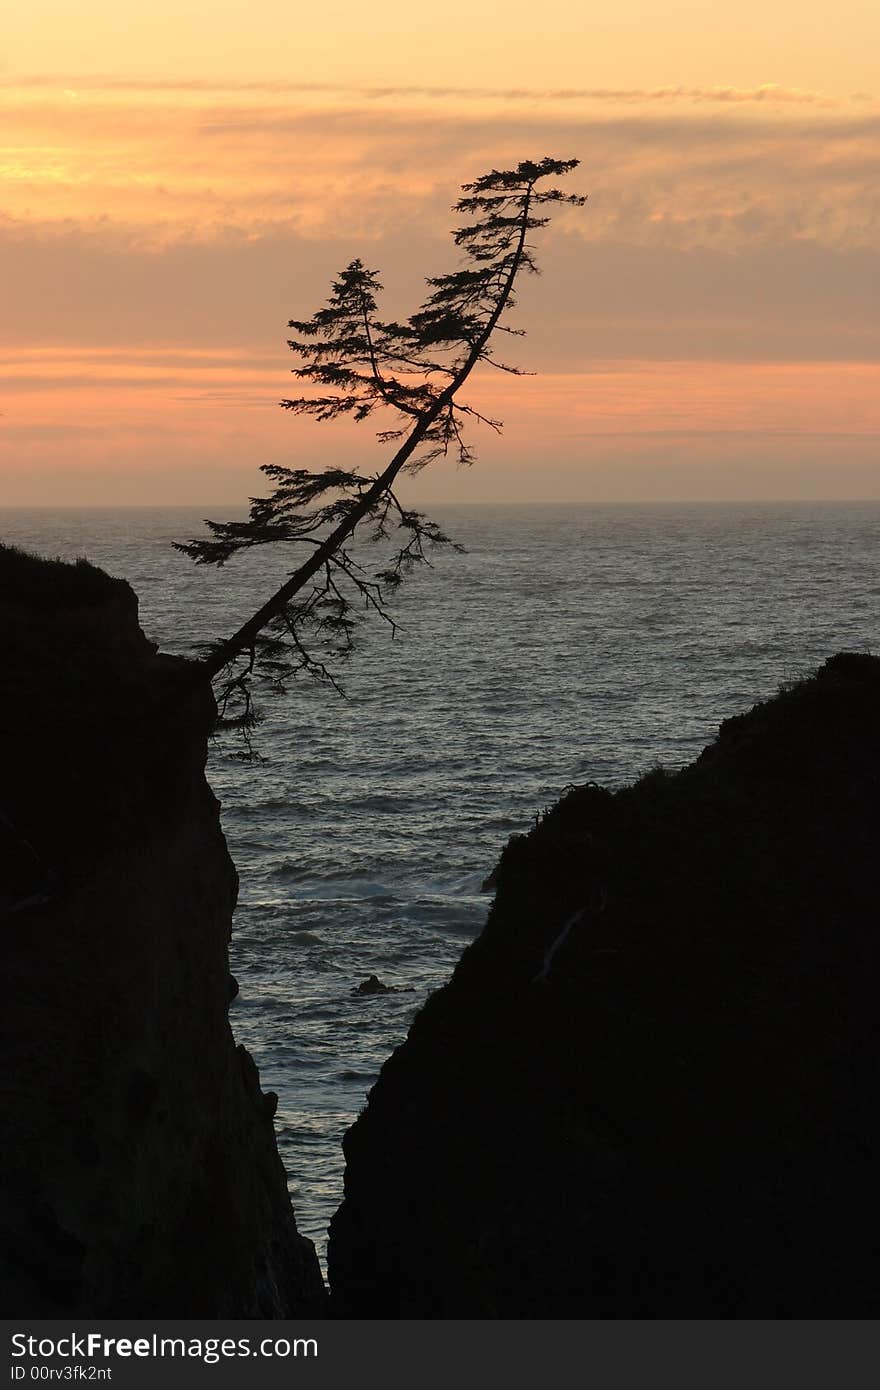 Silhouette of rocks and tree at sunset - Sunset Bay State Park. Silhouette of rocks and tree at sunset - Sunset Bay State Park